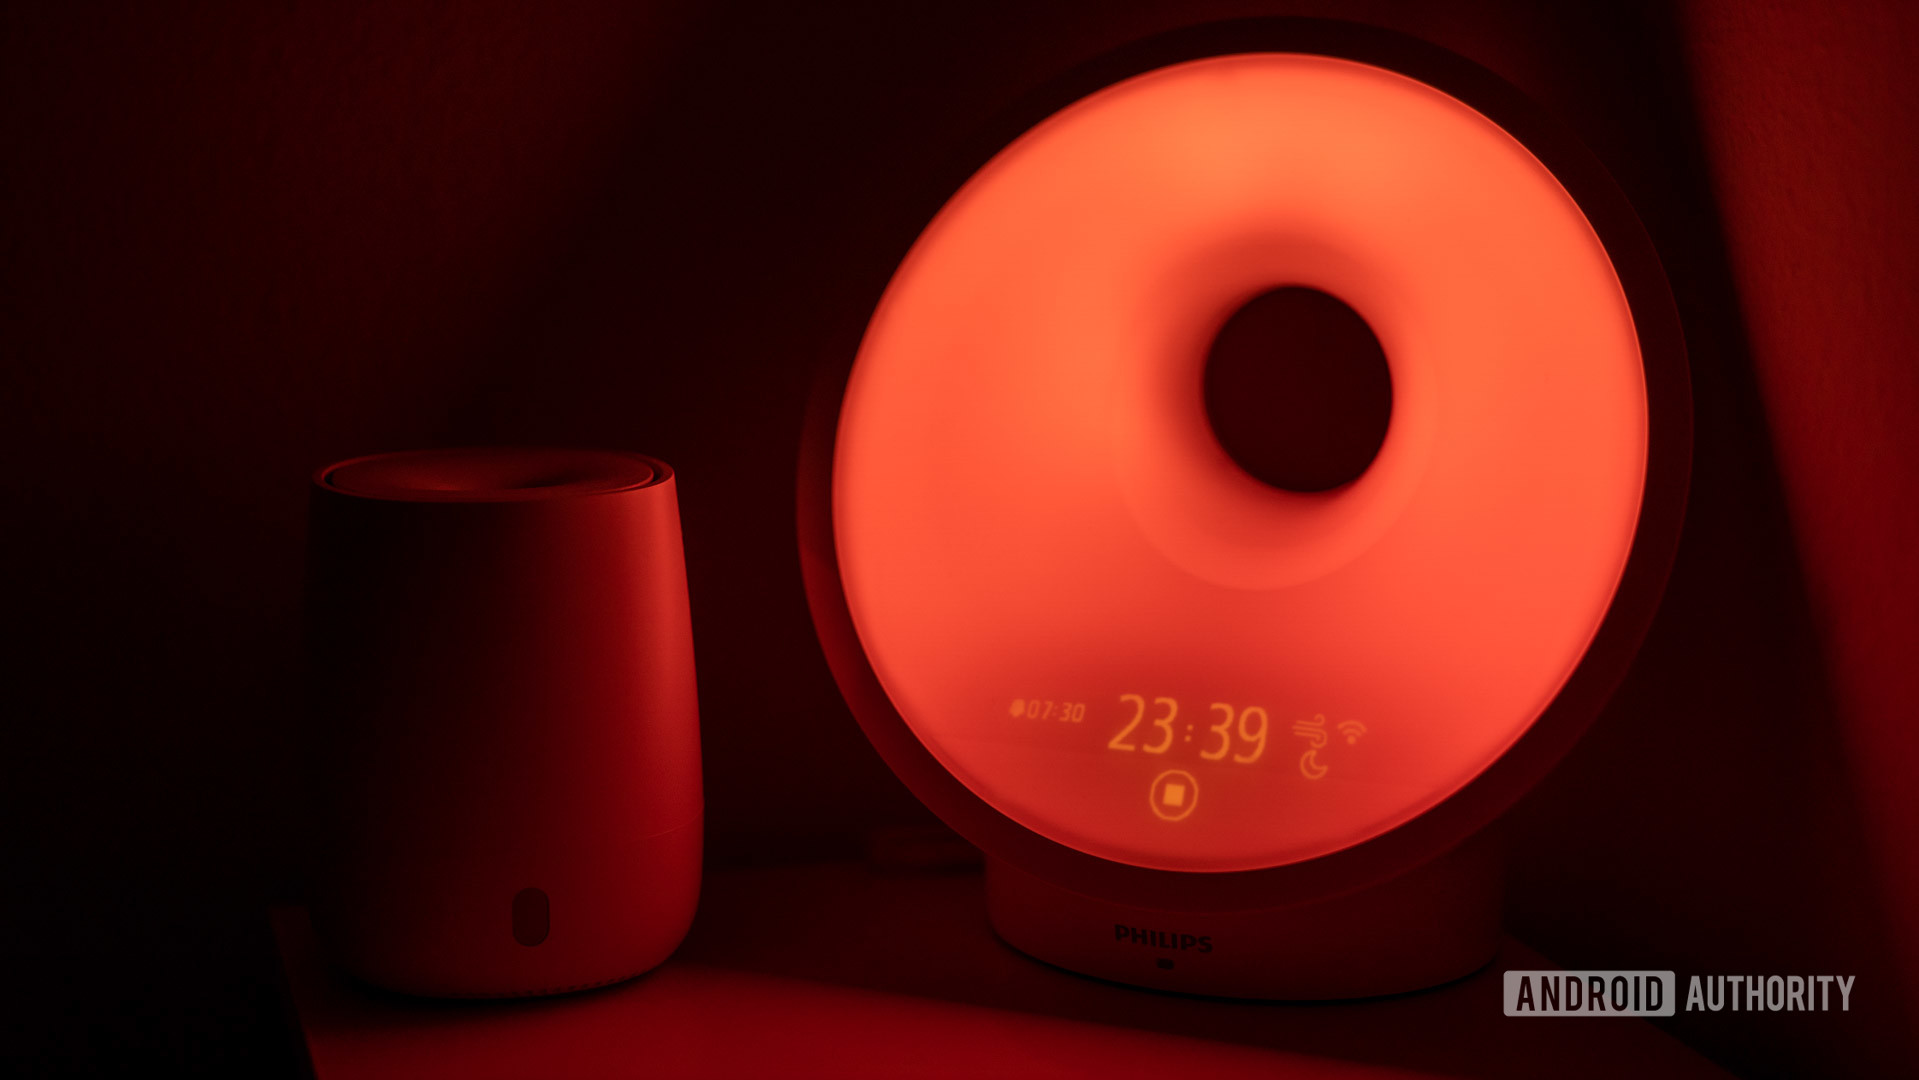 Philips Light review: The alarm clock